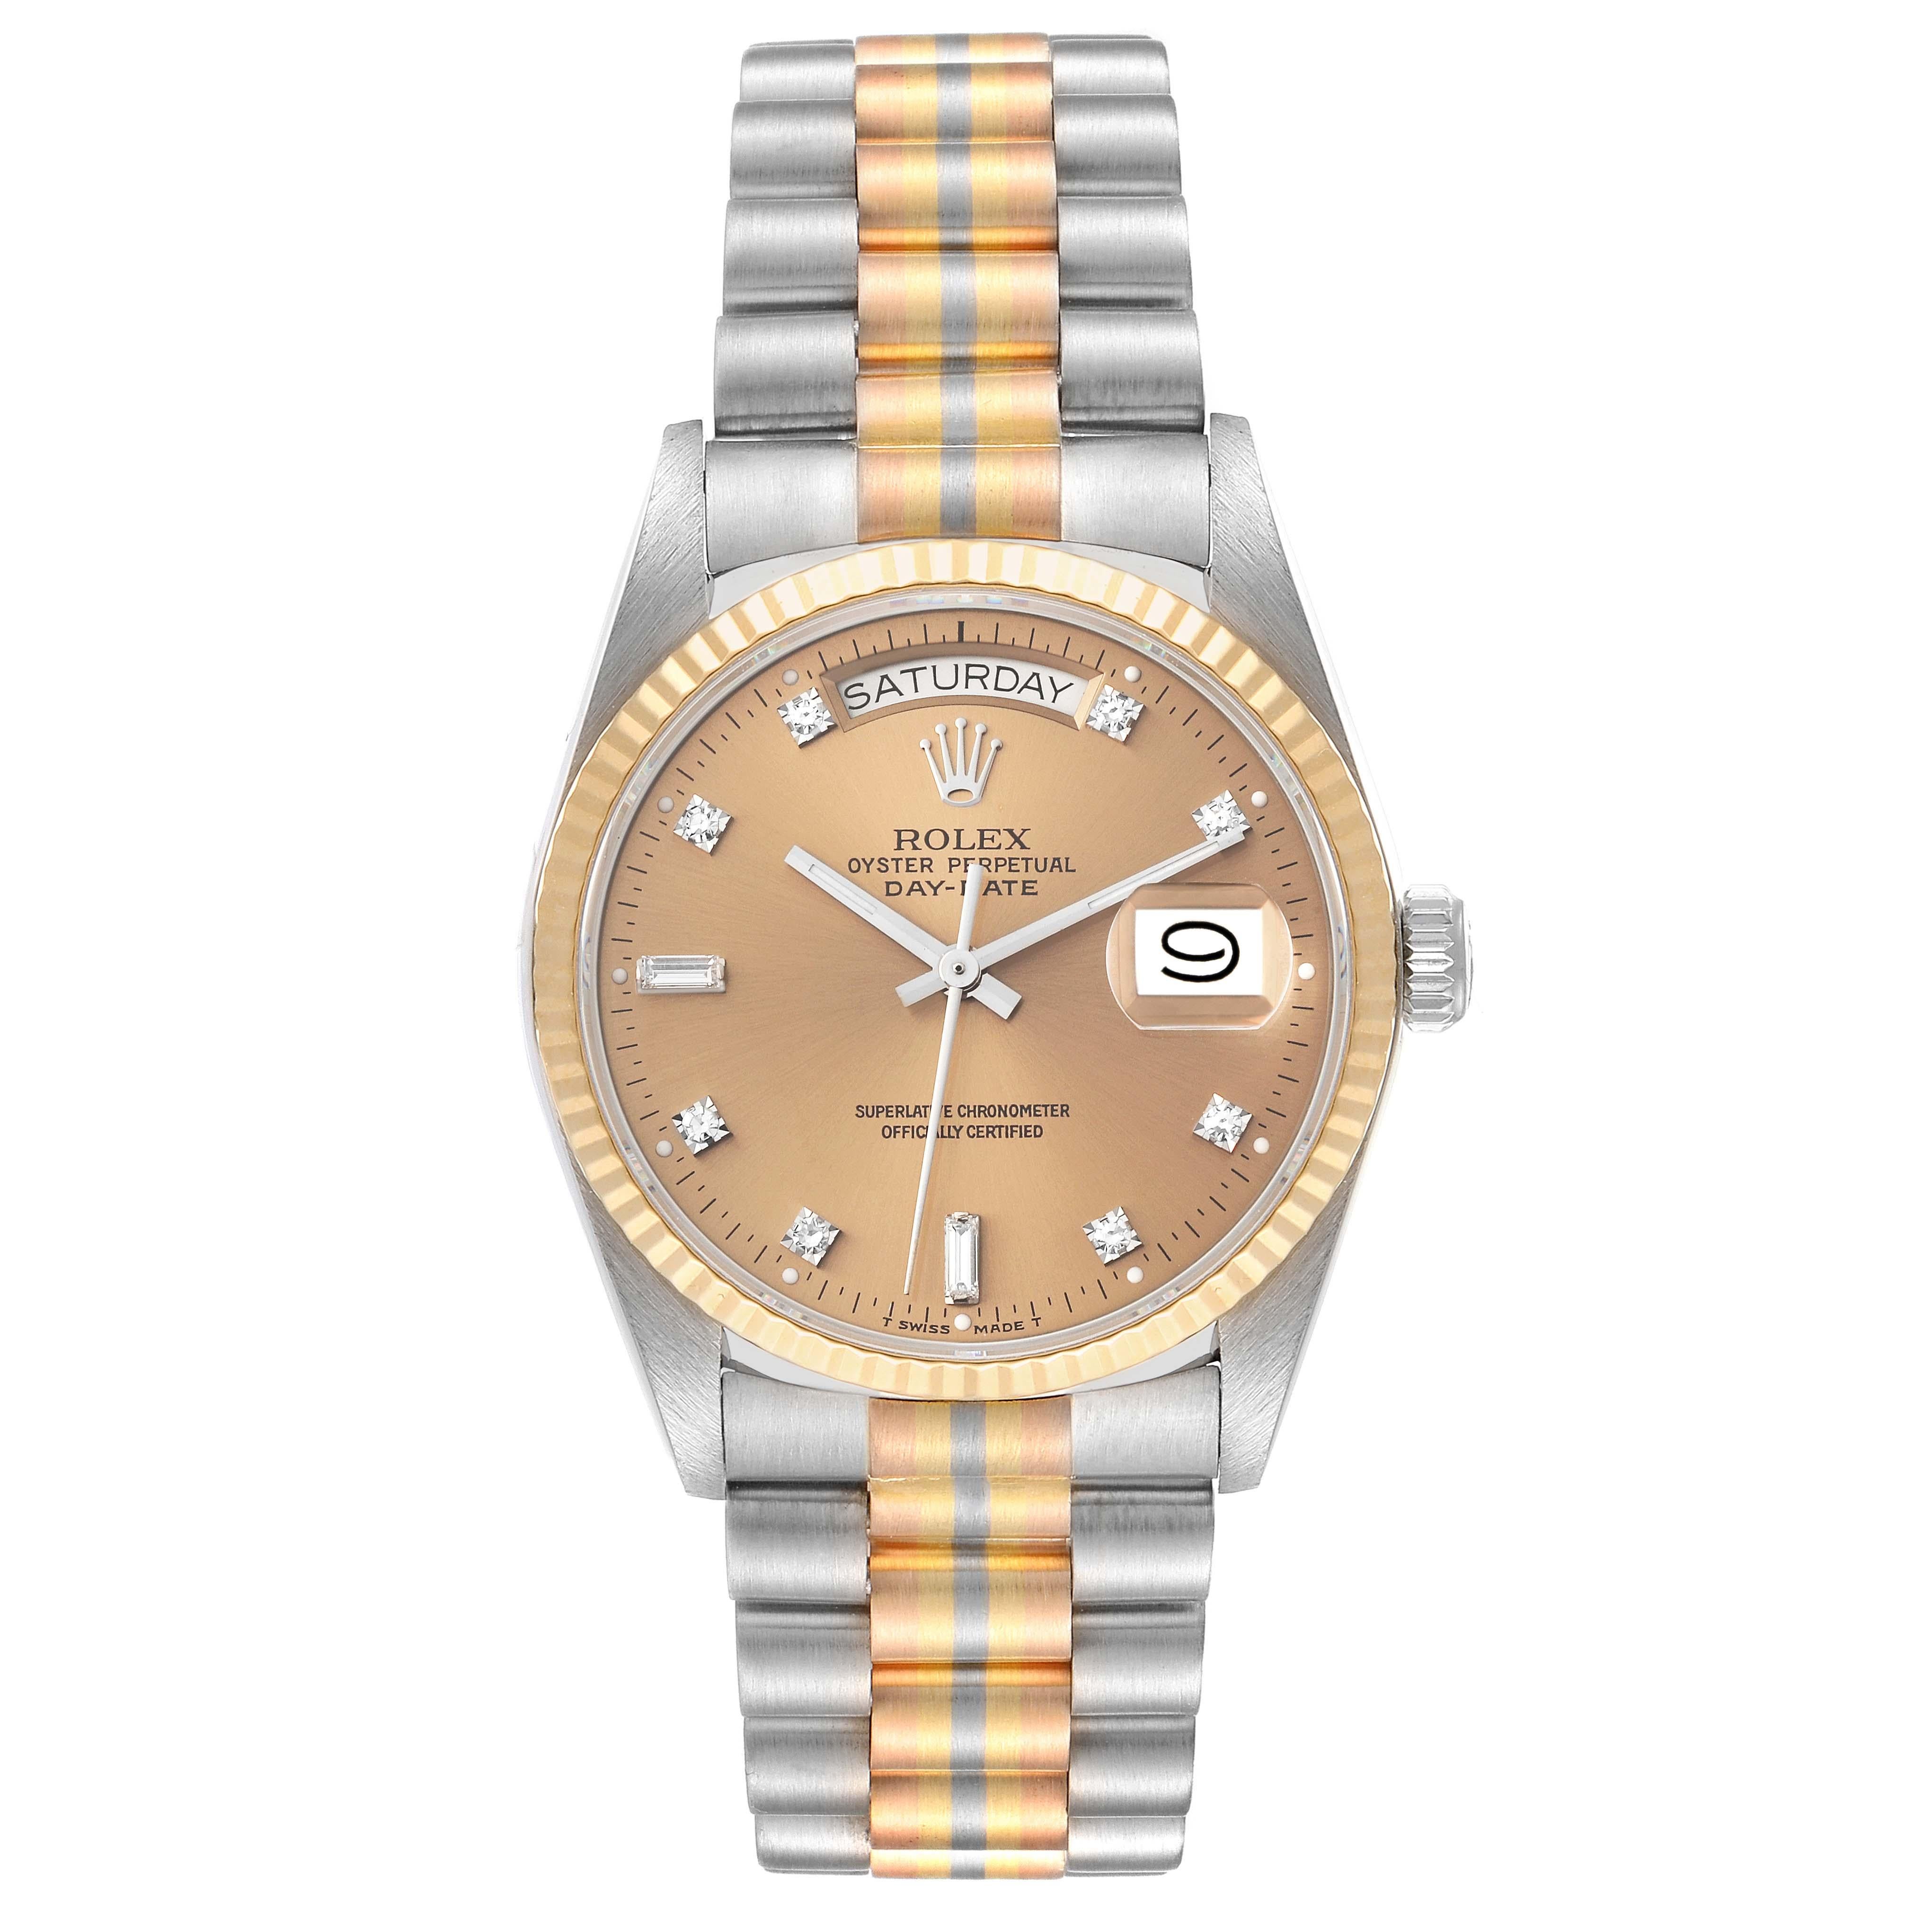 Rolex President Day-Date Tridor White Yellow Rose Gold Diamond Mens Watch 18039. Officially certified chronometer self-winding movement with quickset date function. 18k white gold oyster case 36.0 mm in diameter. Rolex logo on a crown. 18k yellow